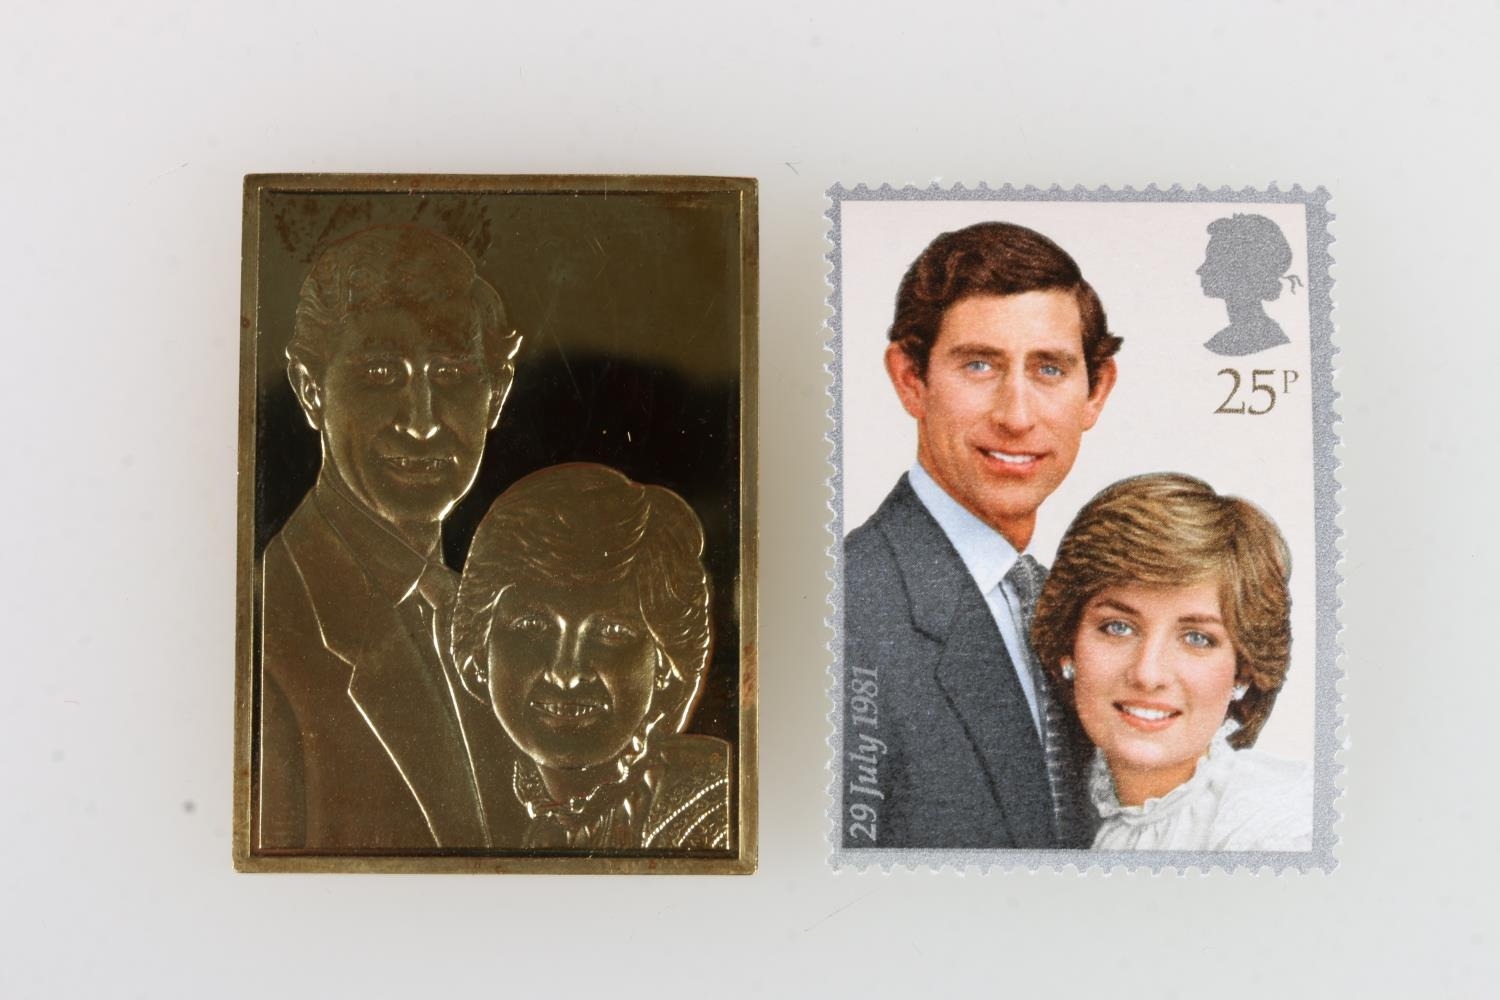 Hallmark Replicas Limited The Coronation Issue 18ct gold proof stamp ingot of Lord Snowdon's - Image 2 of 3